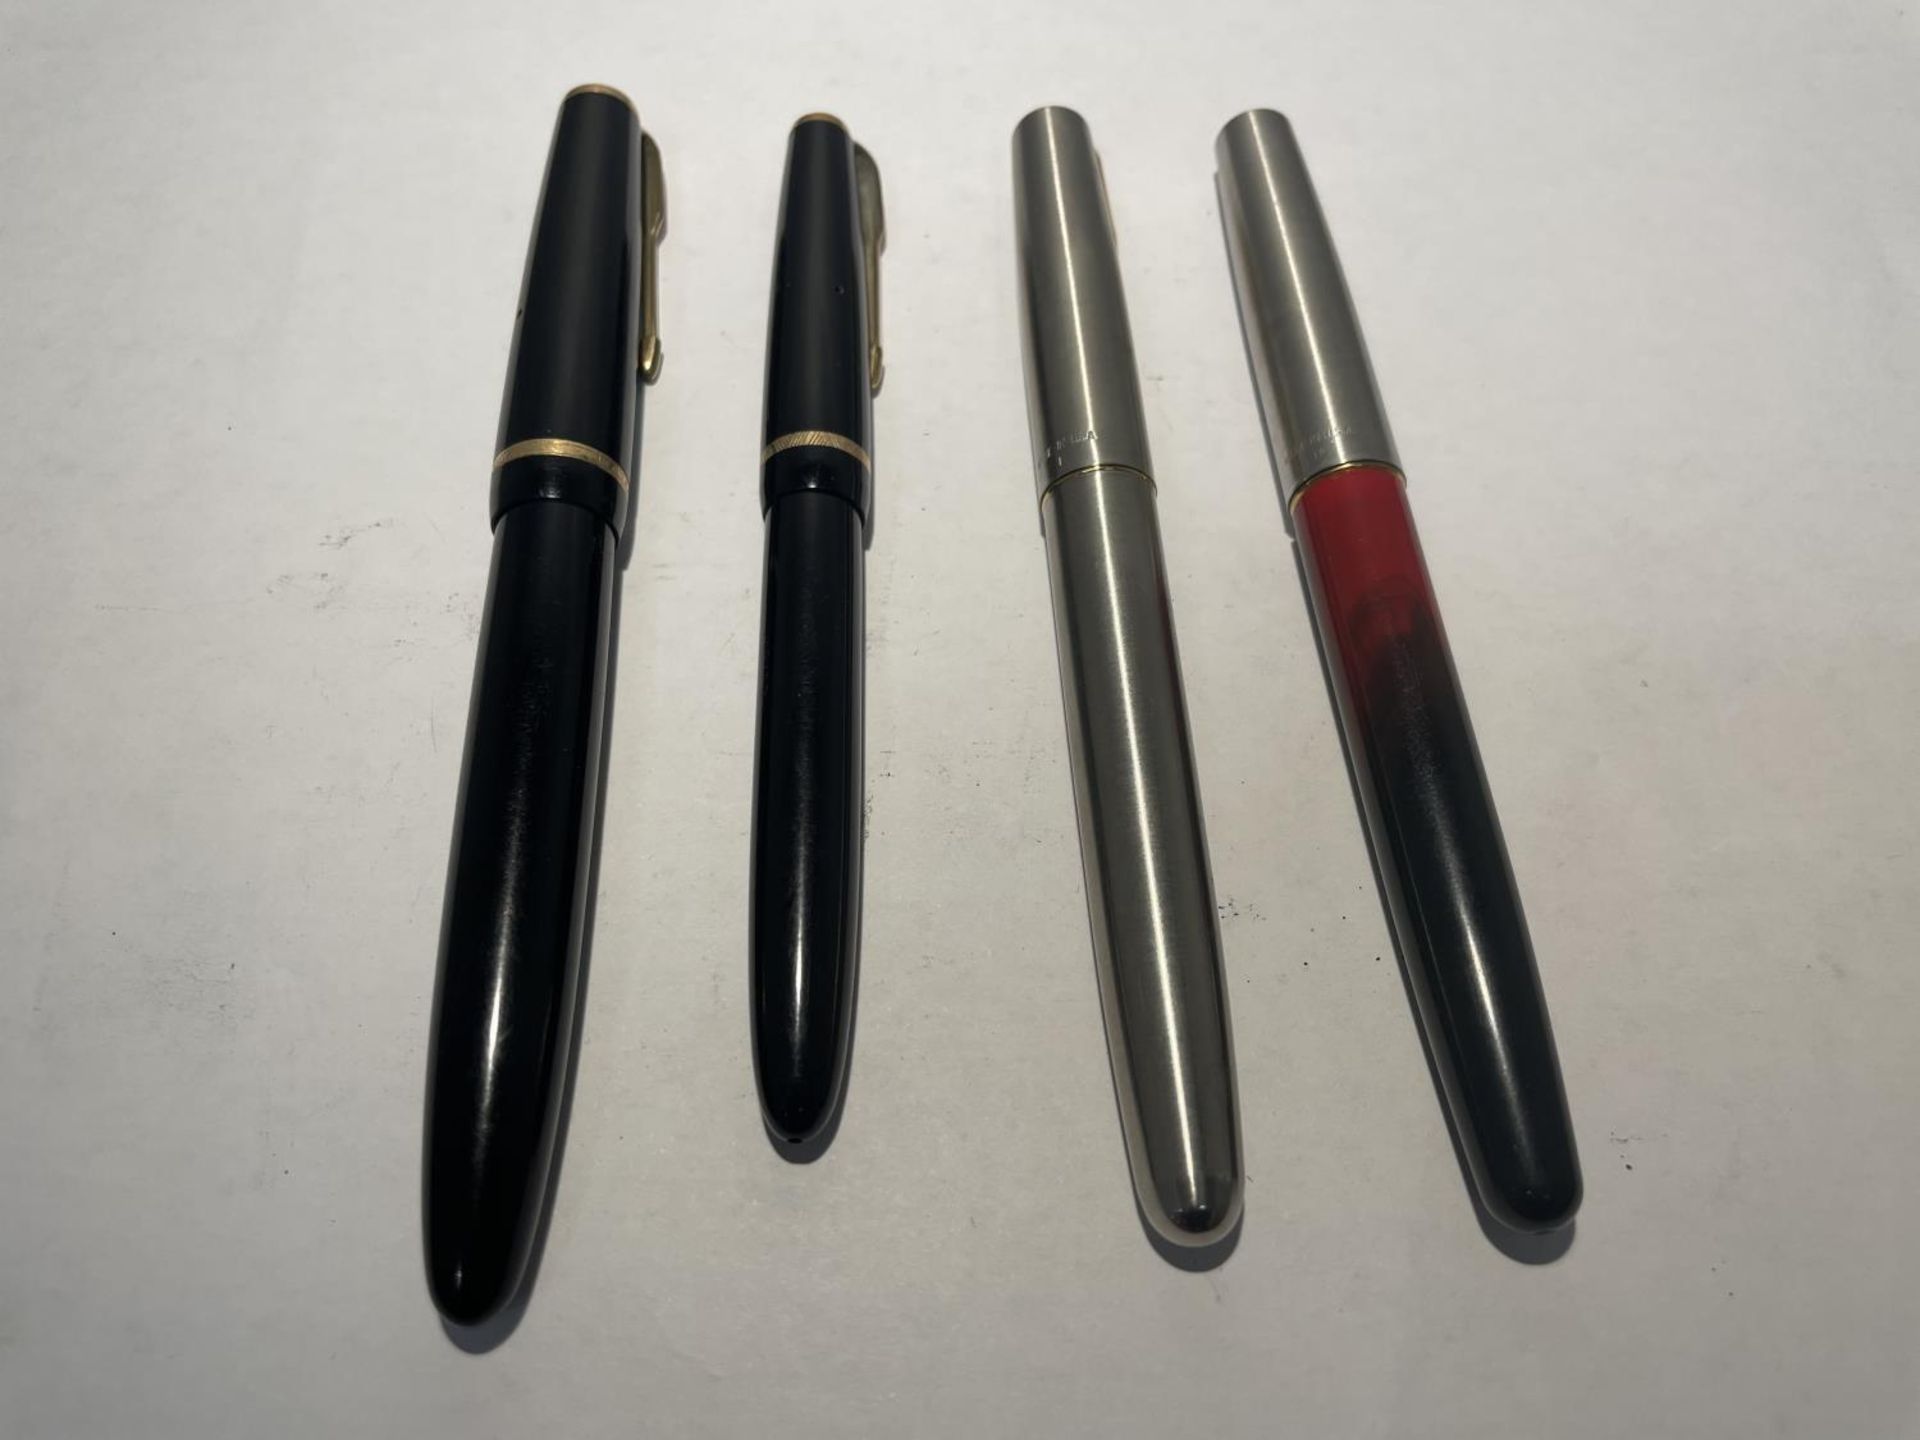 FOUR VINTAGE PARKER FOUNTAIN PENS - TWO WITH 14 CARAT GOLD NIBS